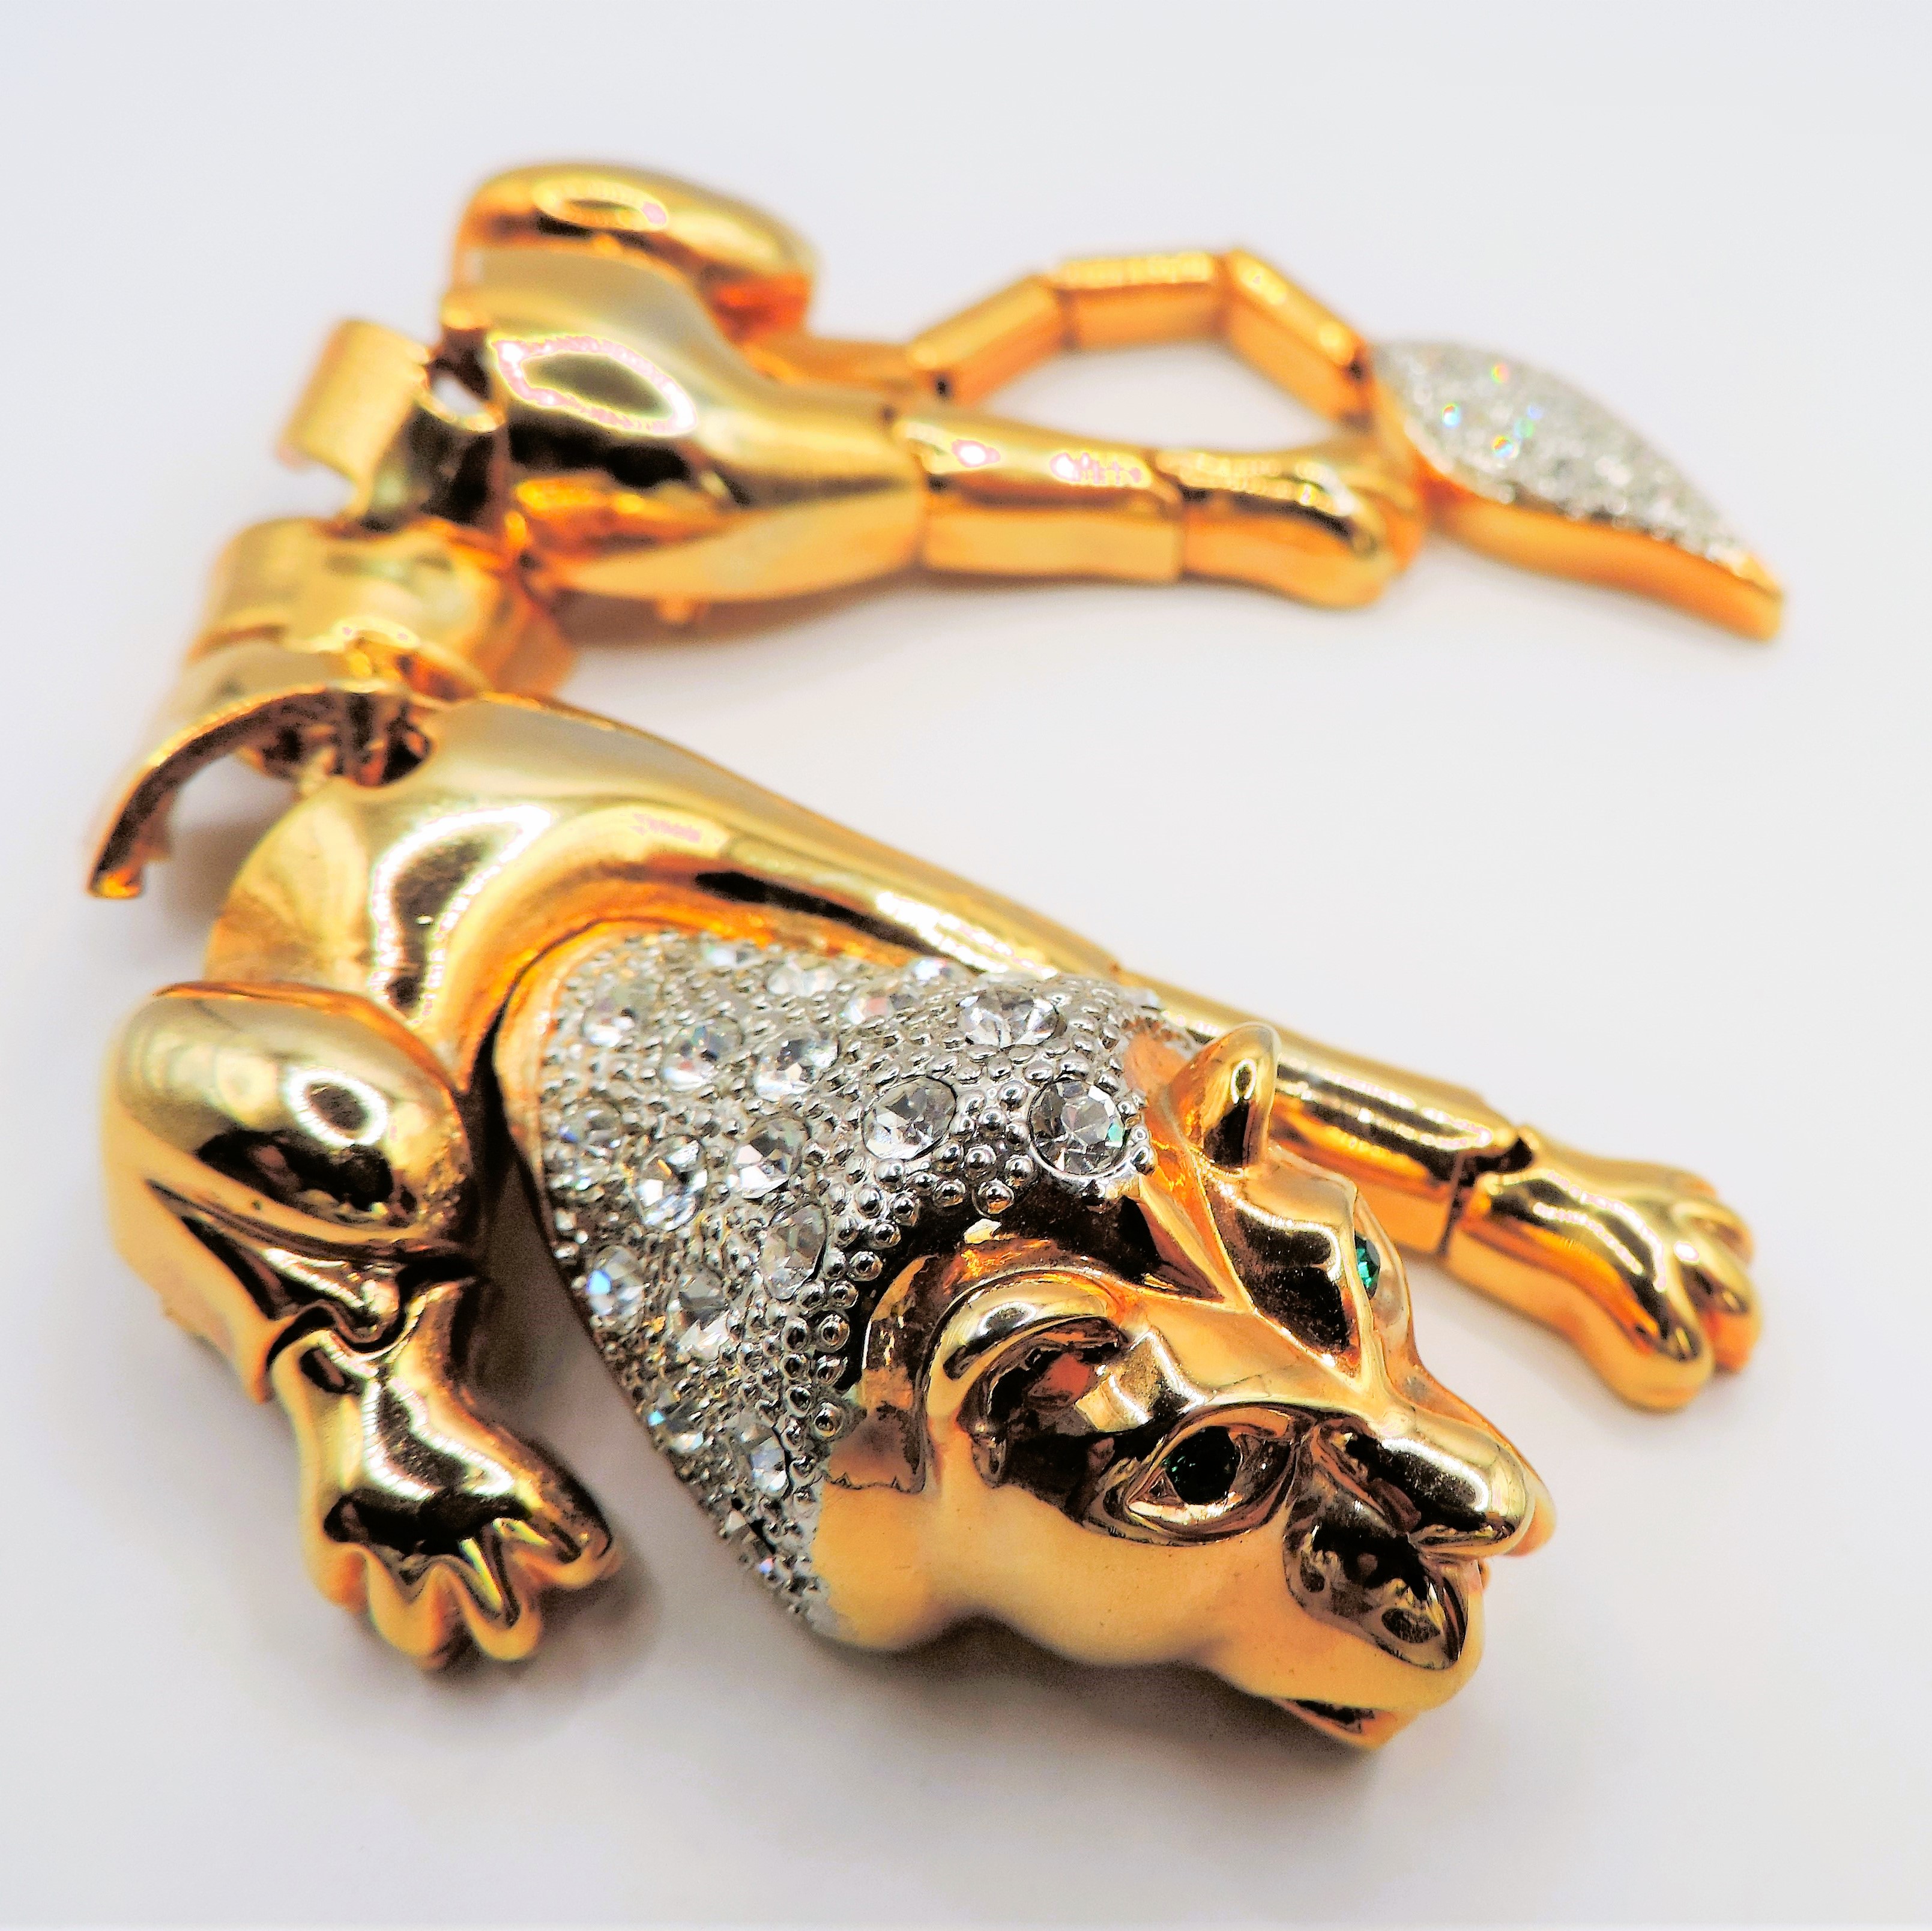 Vintage Gold Plated Crystal Lion Articulated Shoulder Brooch 7 inches Long c. 1980's - Image 2 of 6